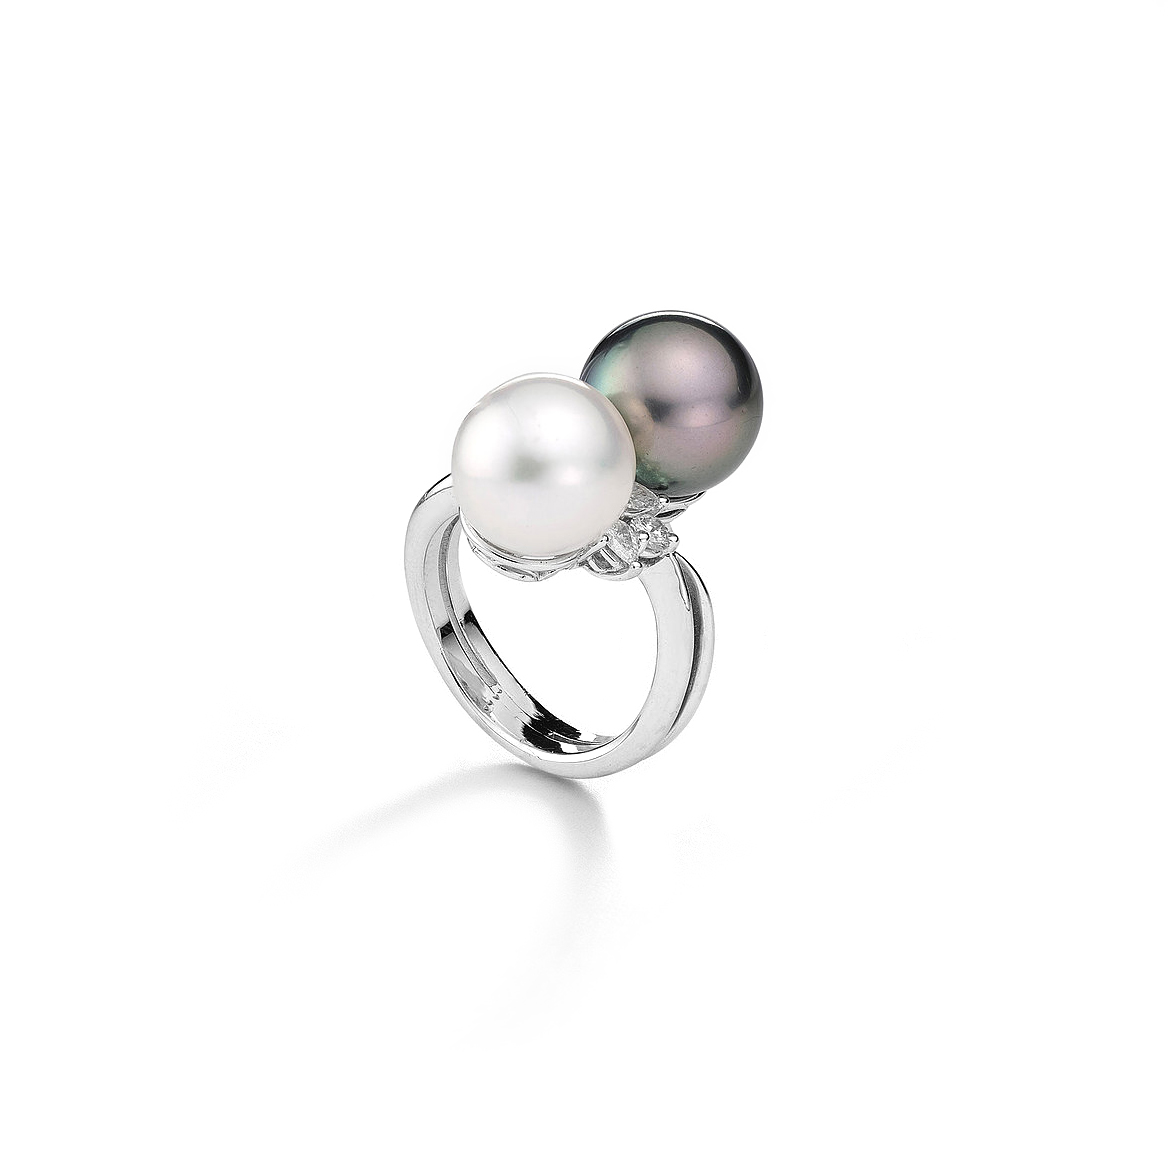 Platinum 6-6.5 mm Cultured White Freshwater Pearl Ring